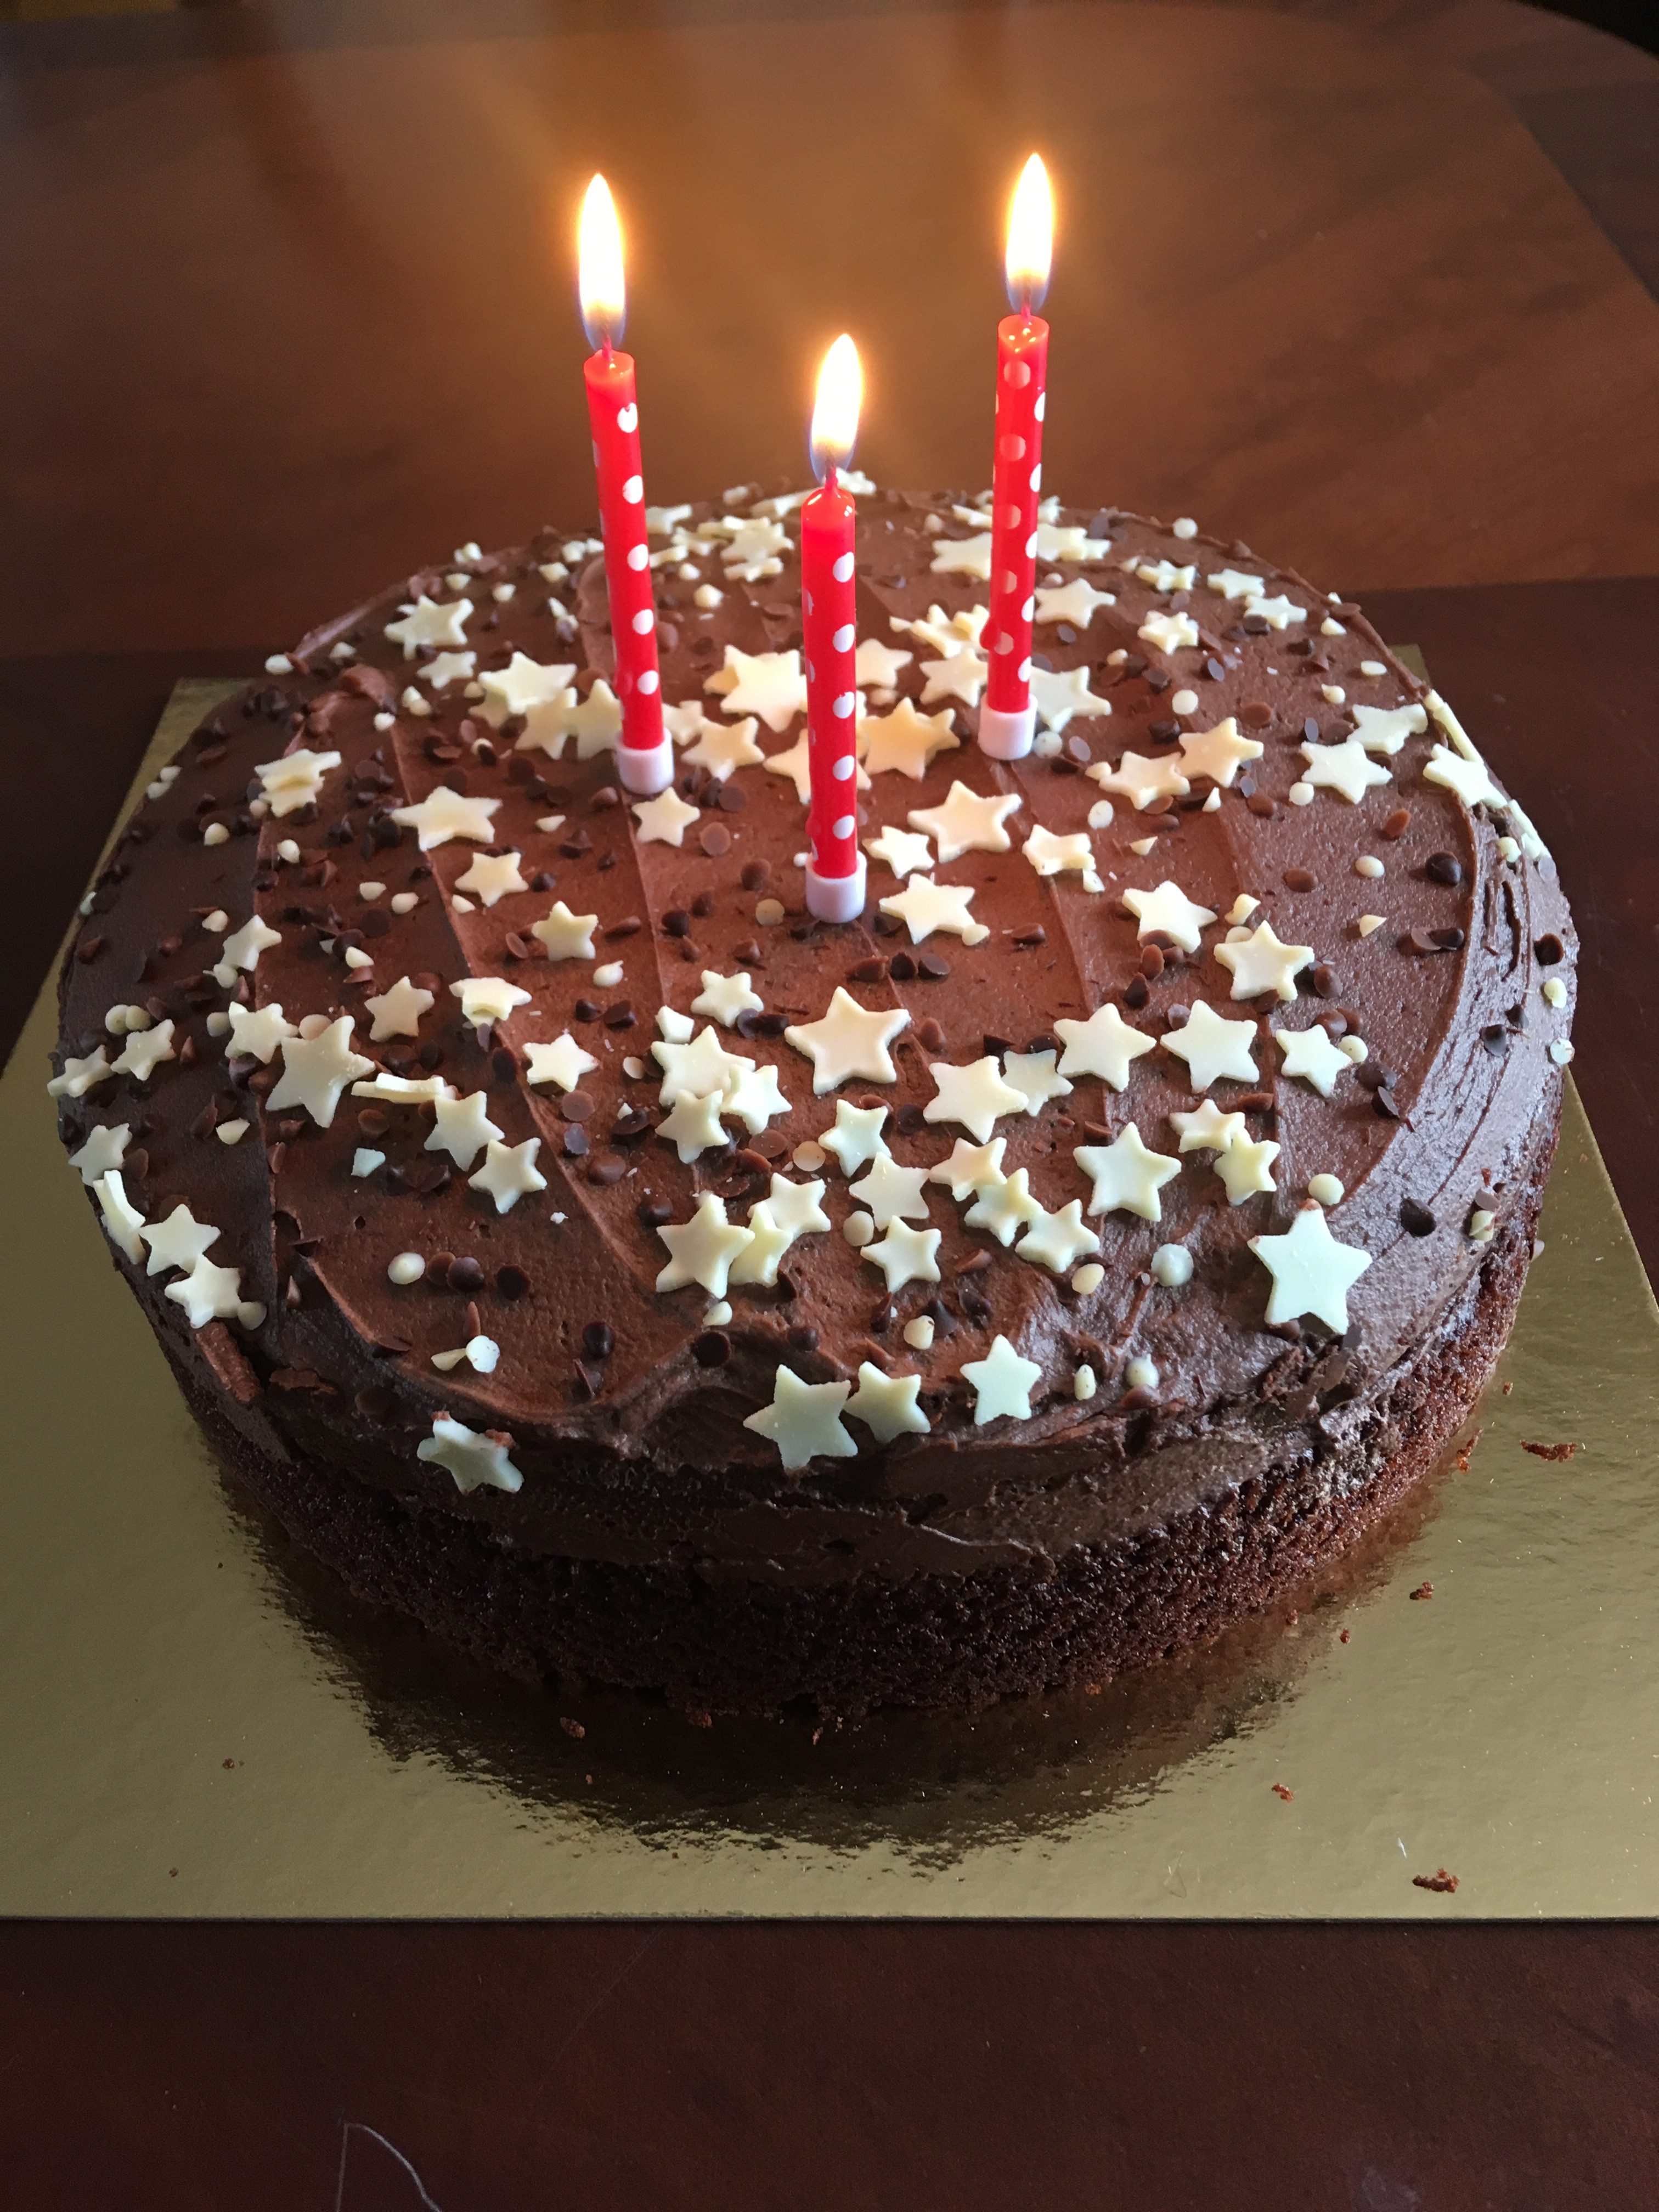 A photo of my birthday cake. It's a large circular chocolate cake, with white star chocolate sprinkles over it. There are three red lit candles.